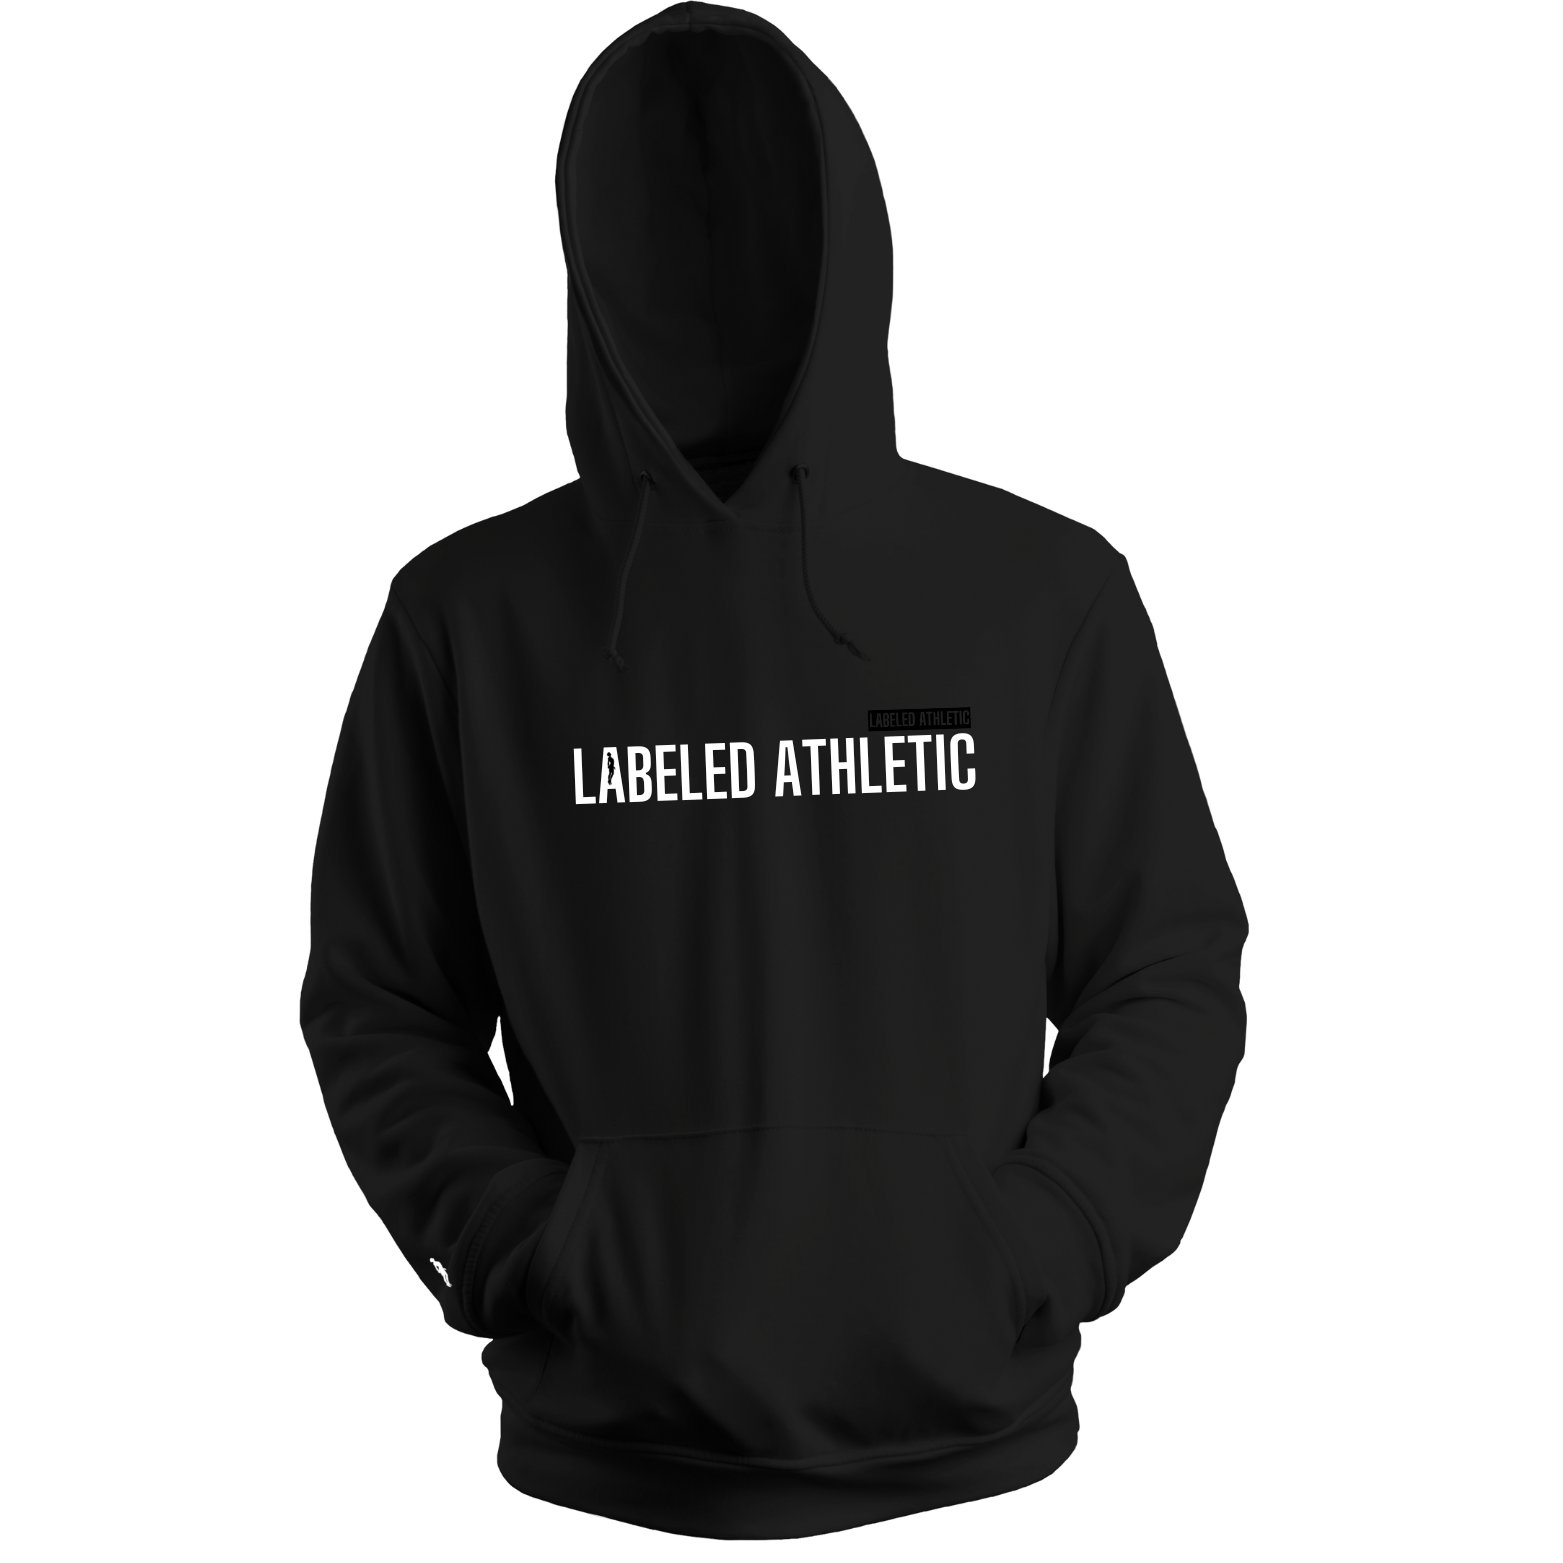 HOODIE SZN BLK/WHT - LABELED ATHLETIC